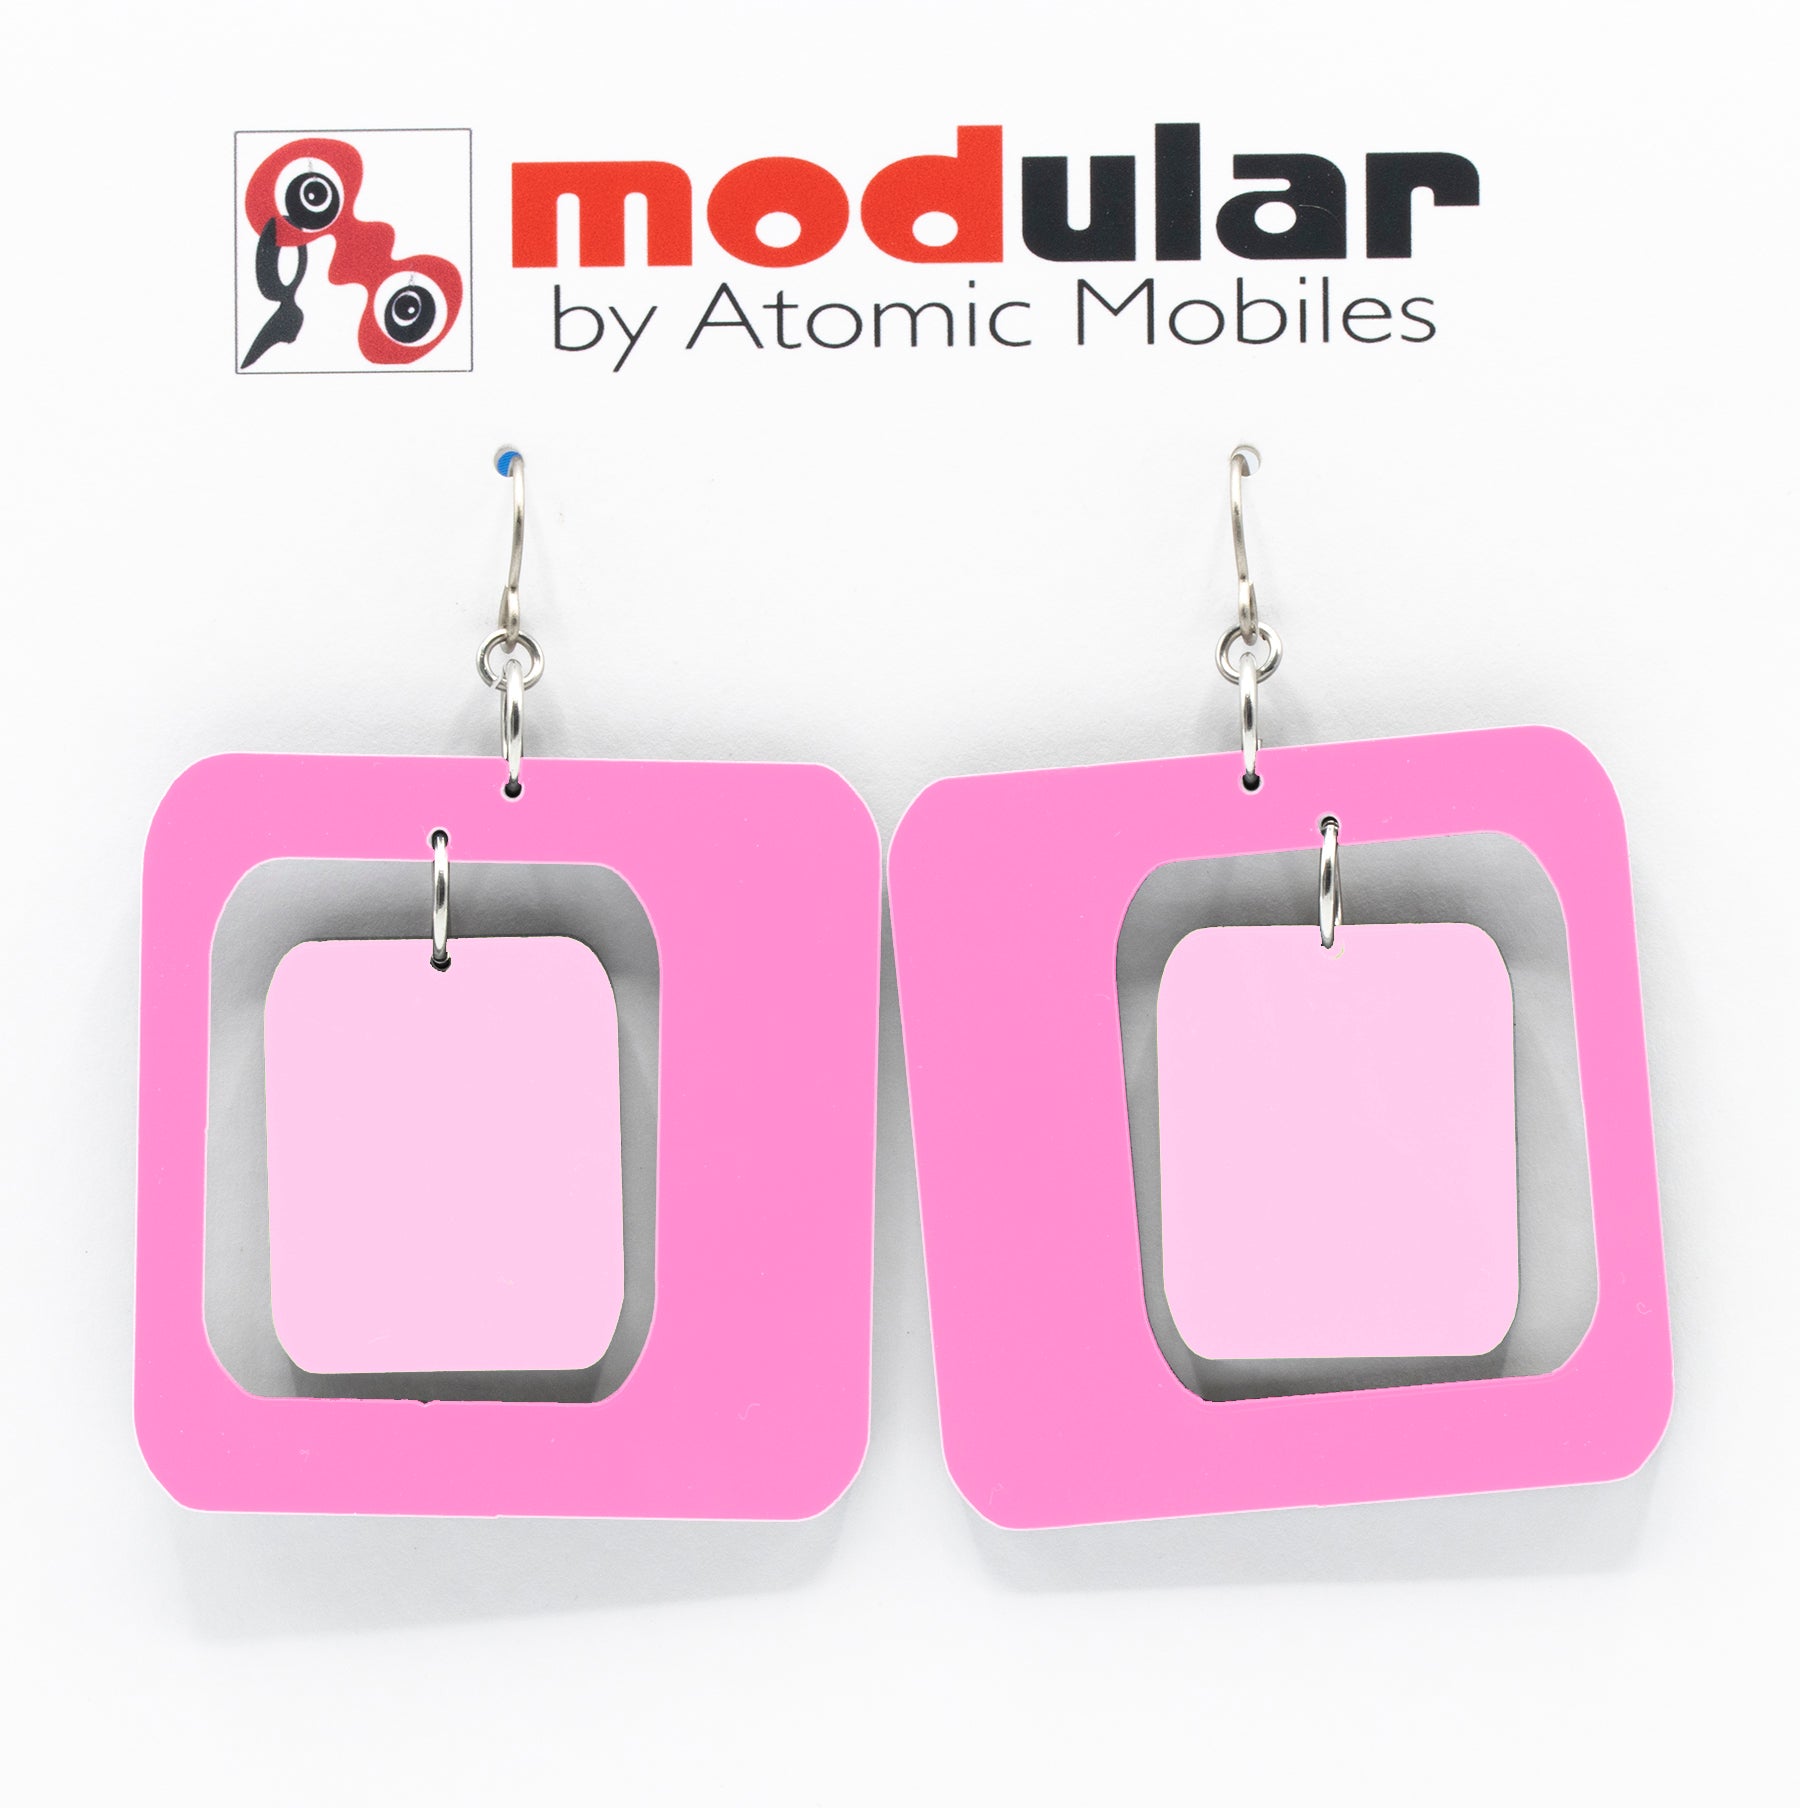 MODular Earrings - Coolsville Statement Earrings in Hot Pink by AtomicMobiles.com - retro era inspired mod handmade jewelry